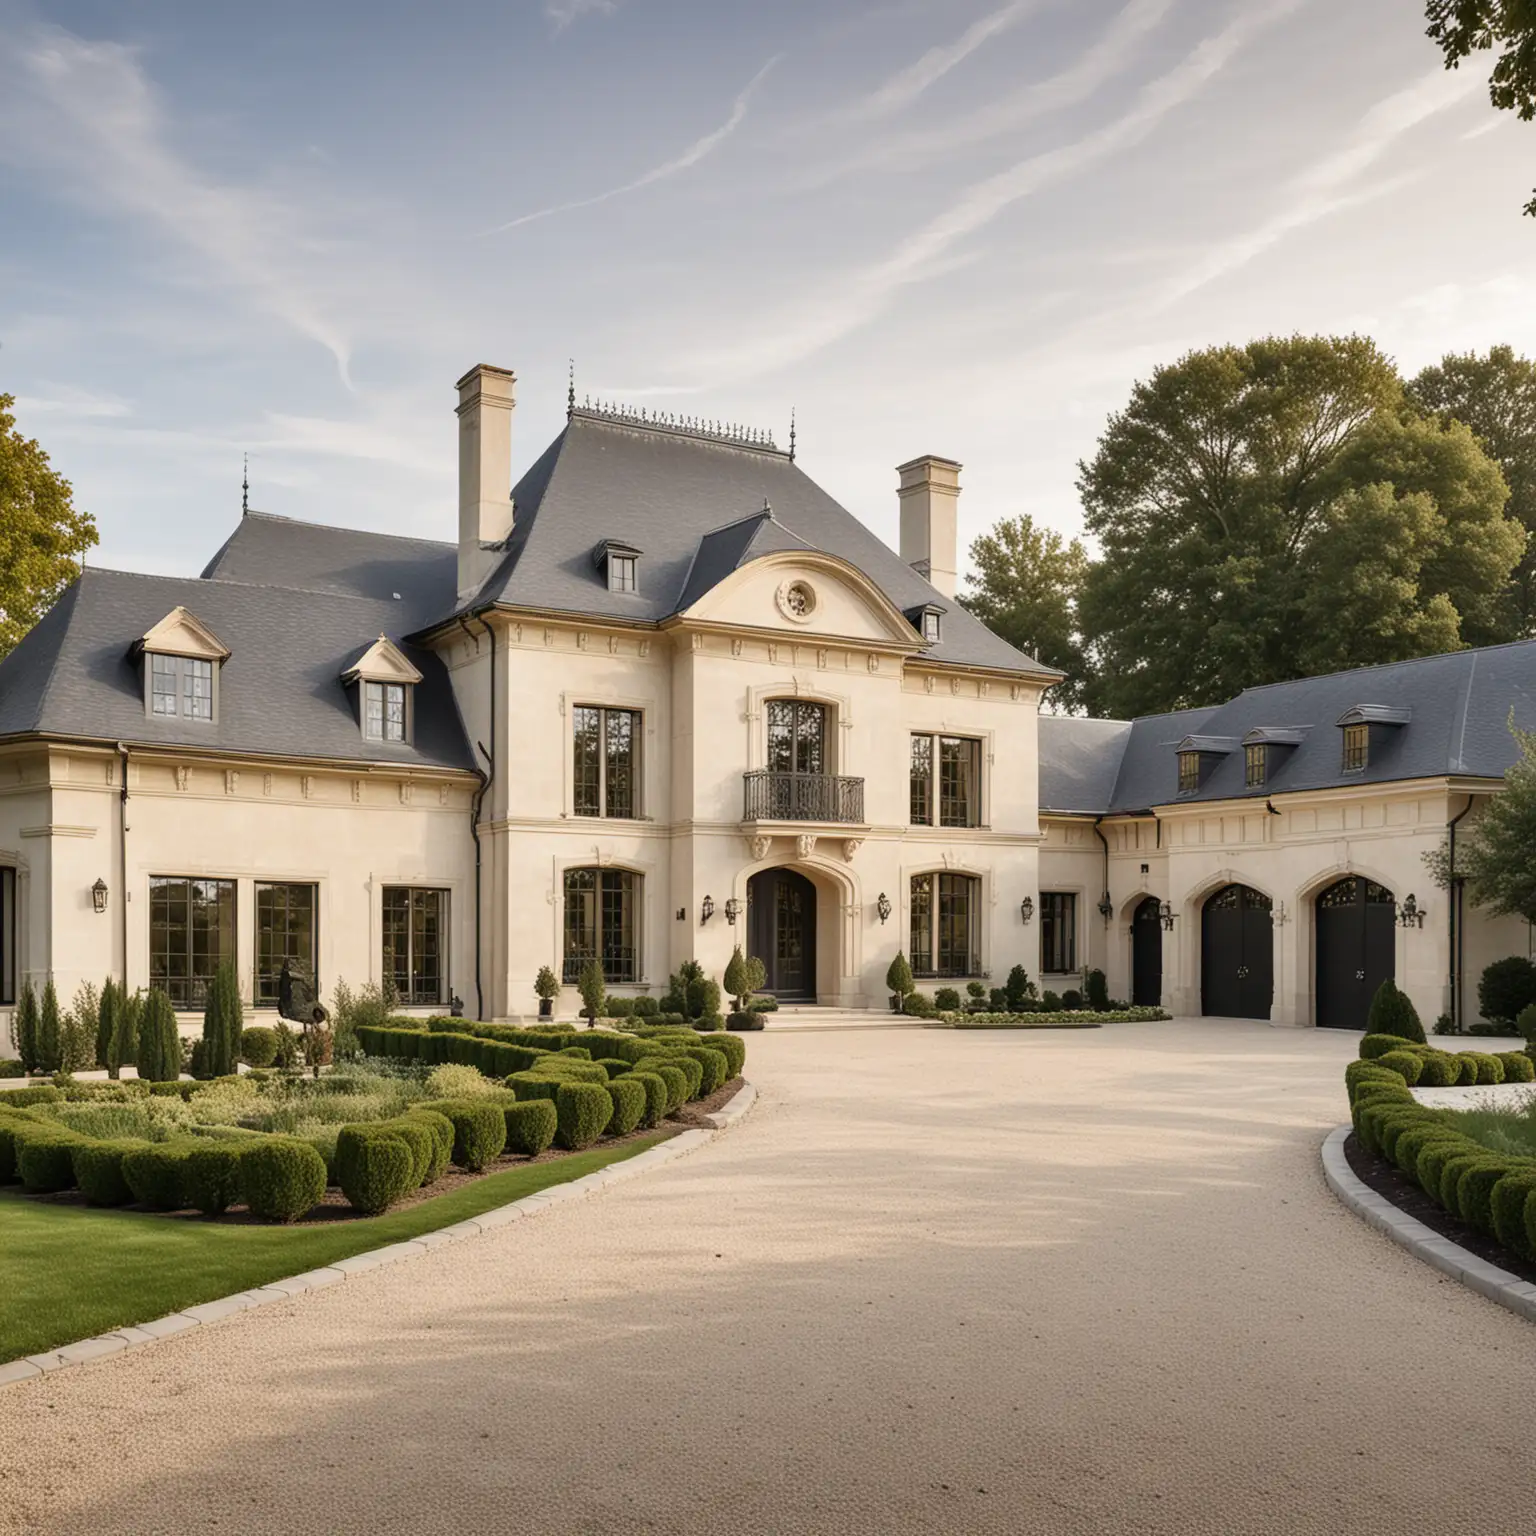 Modern French Chateau Estate Home with Car Garages and Gardens